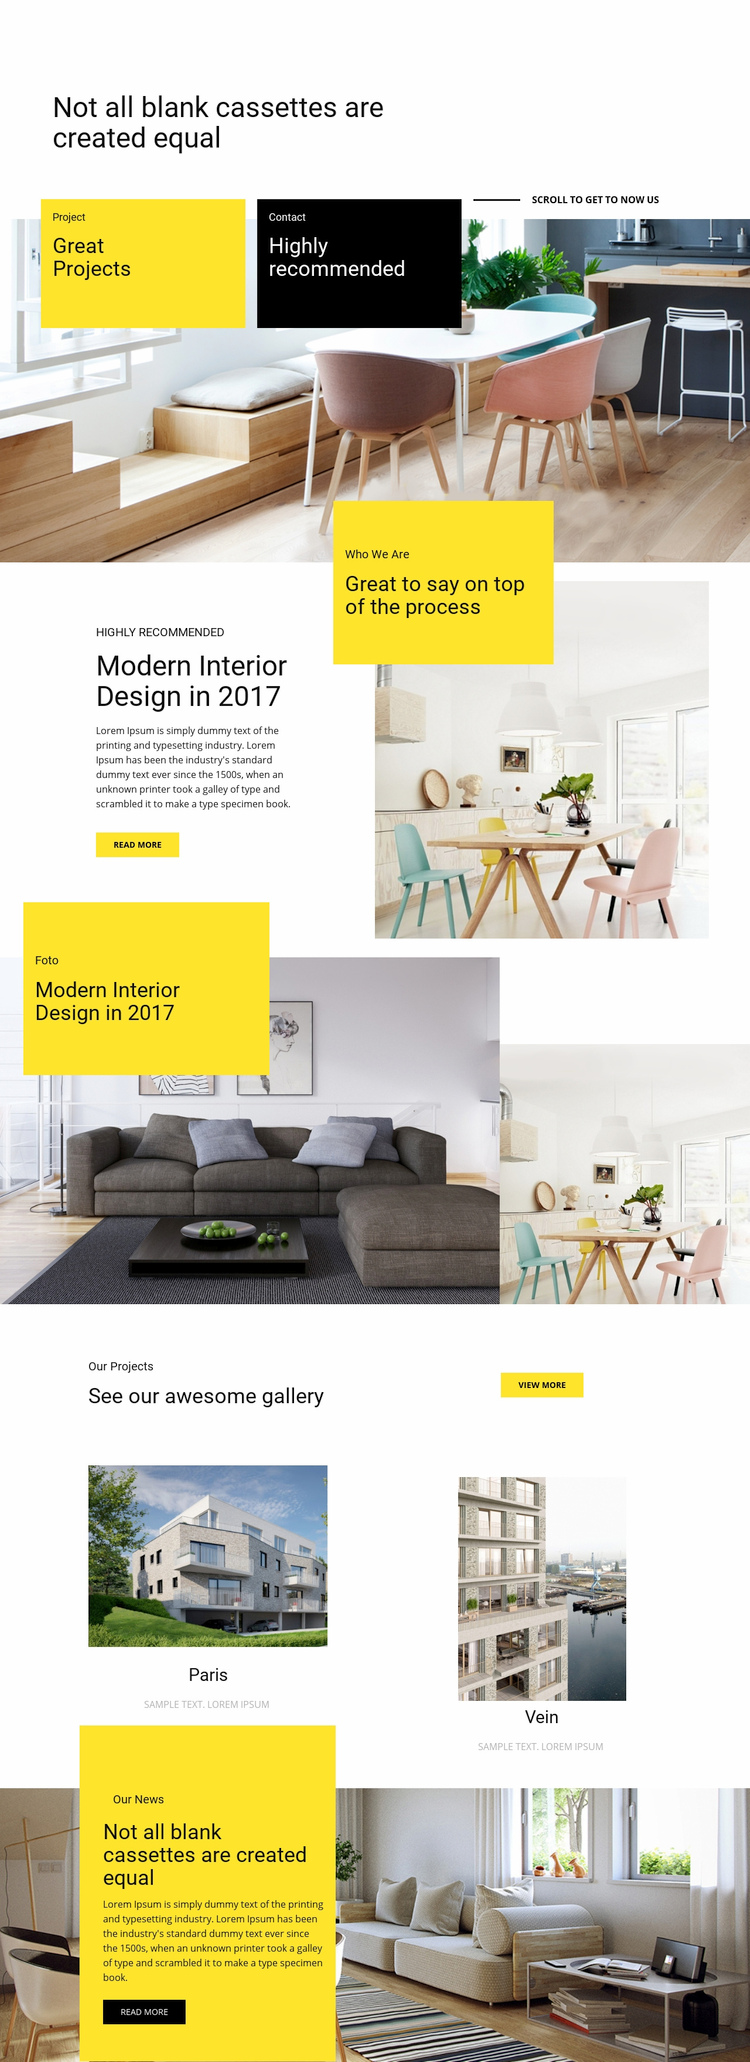 Great projects, high quality Squarespace Template Alternative